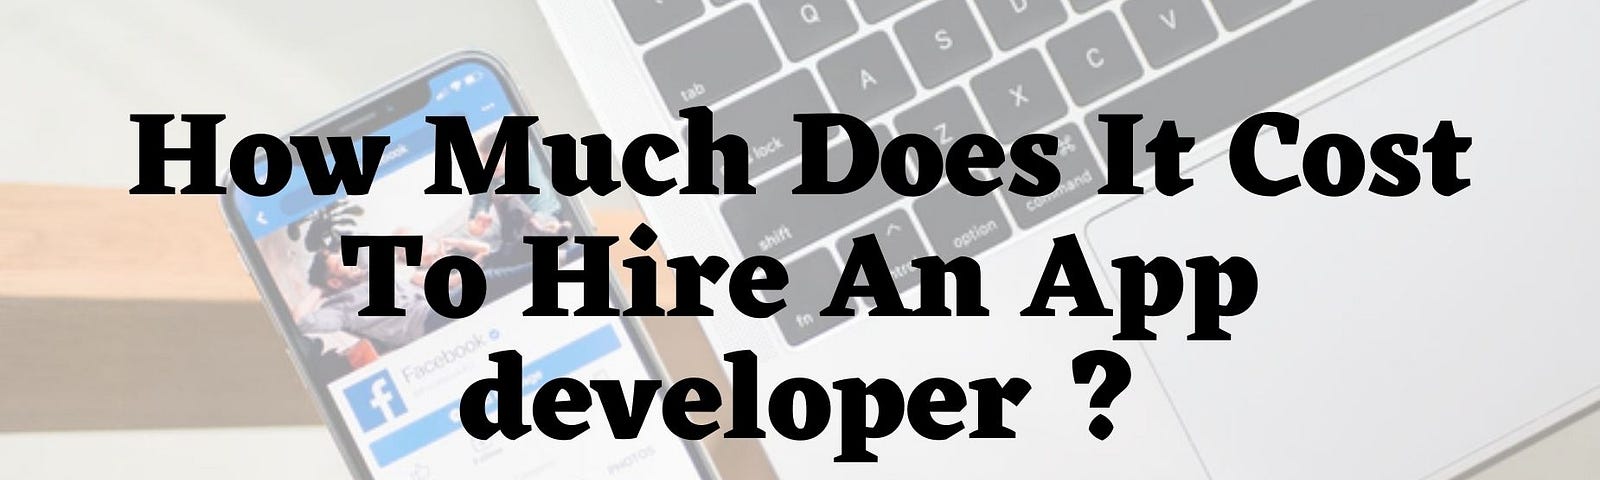 Cost To Hire An App Developer